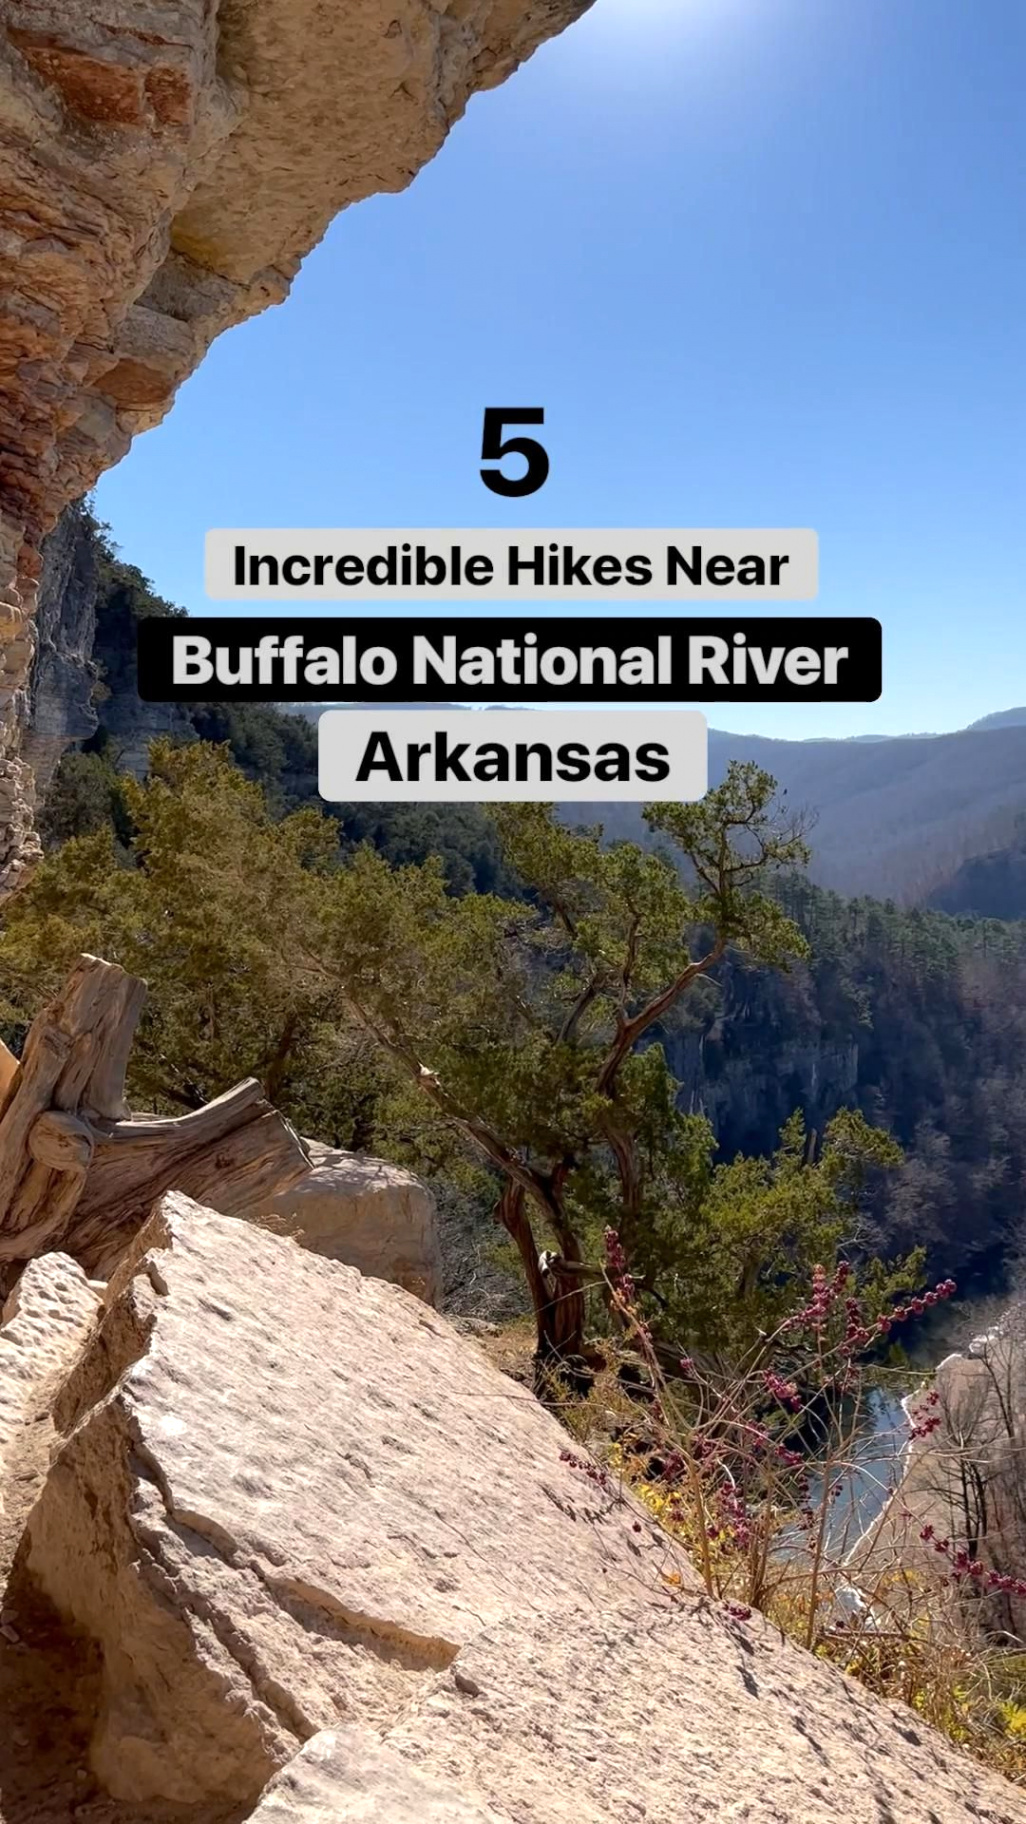 Auto Insurer In Hull, Sioux County Dans 5 Epic Hikes In Buffalo National River Arkansas